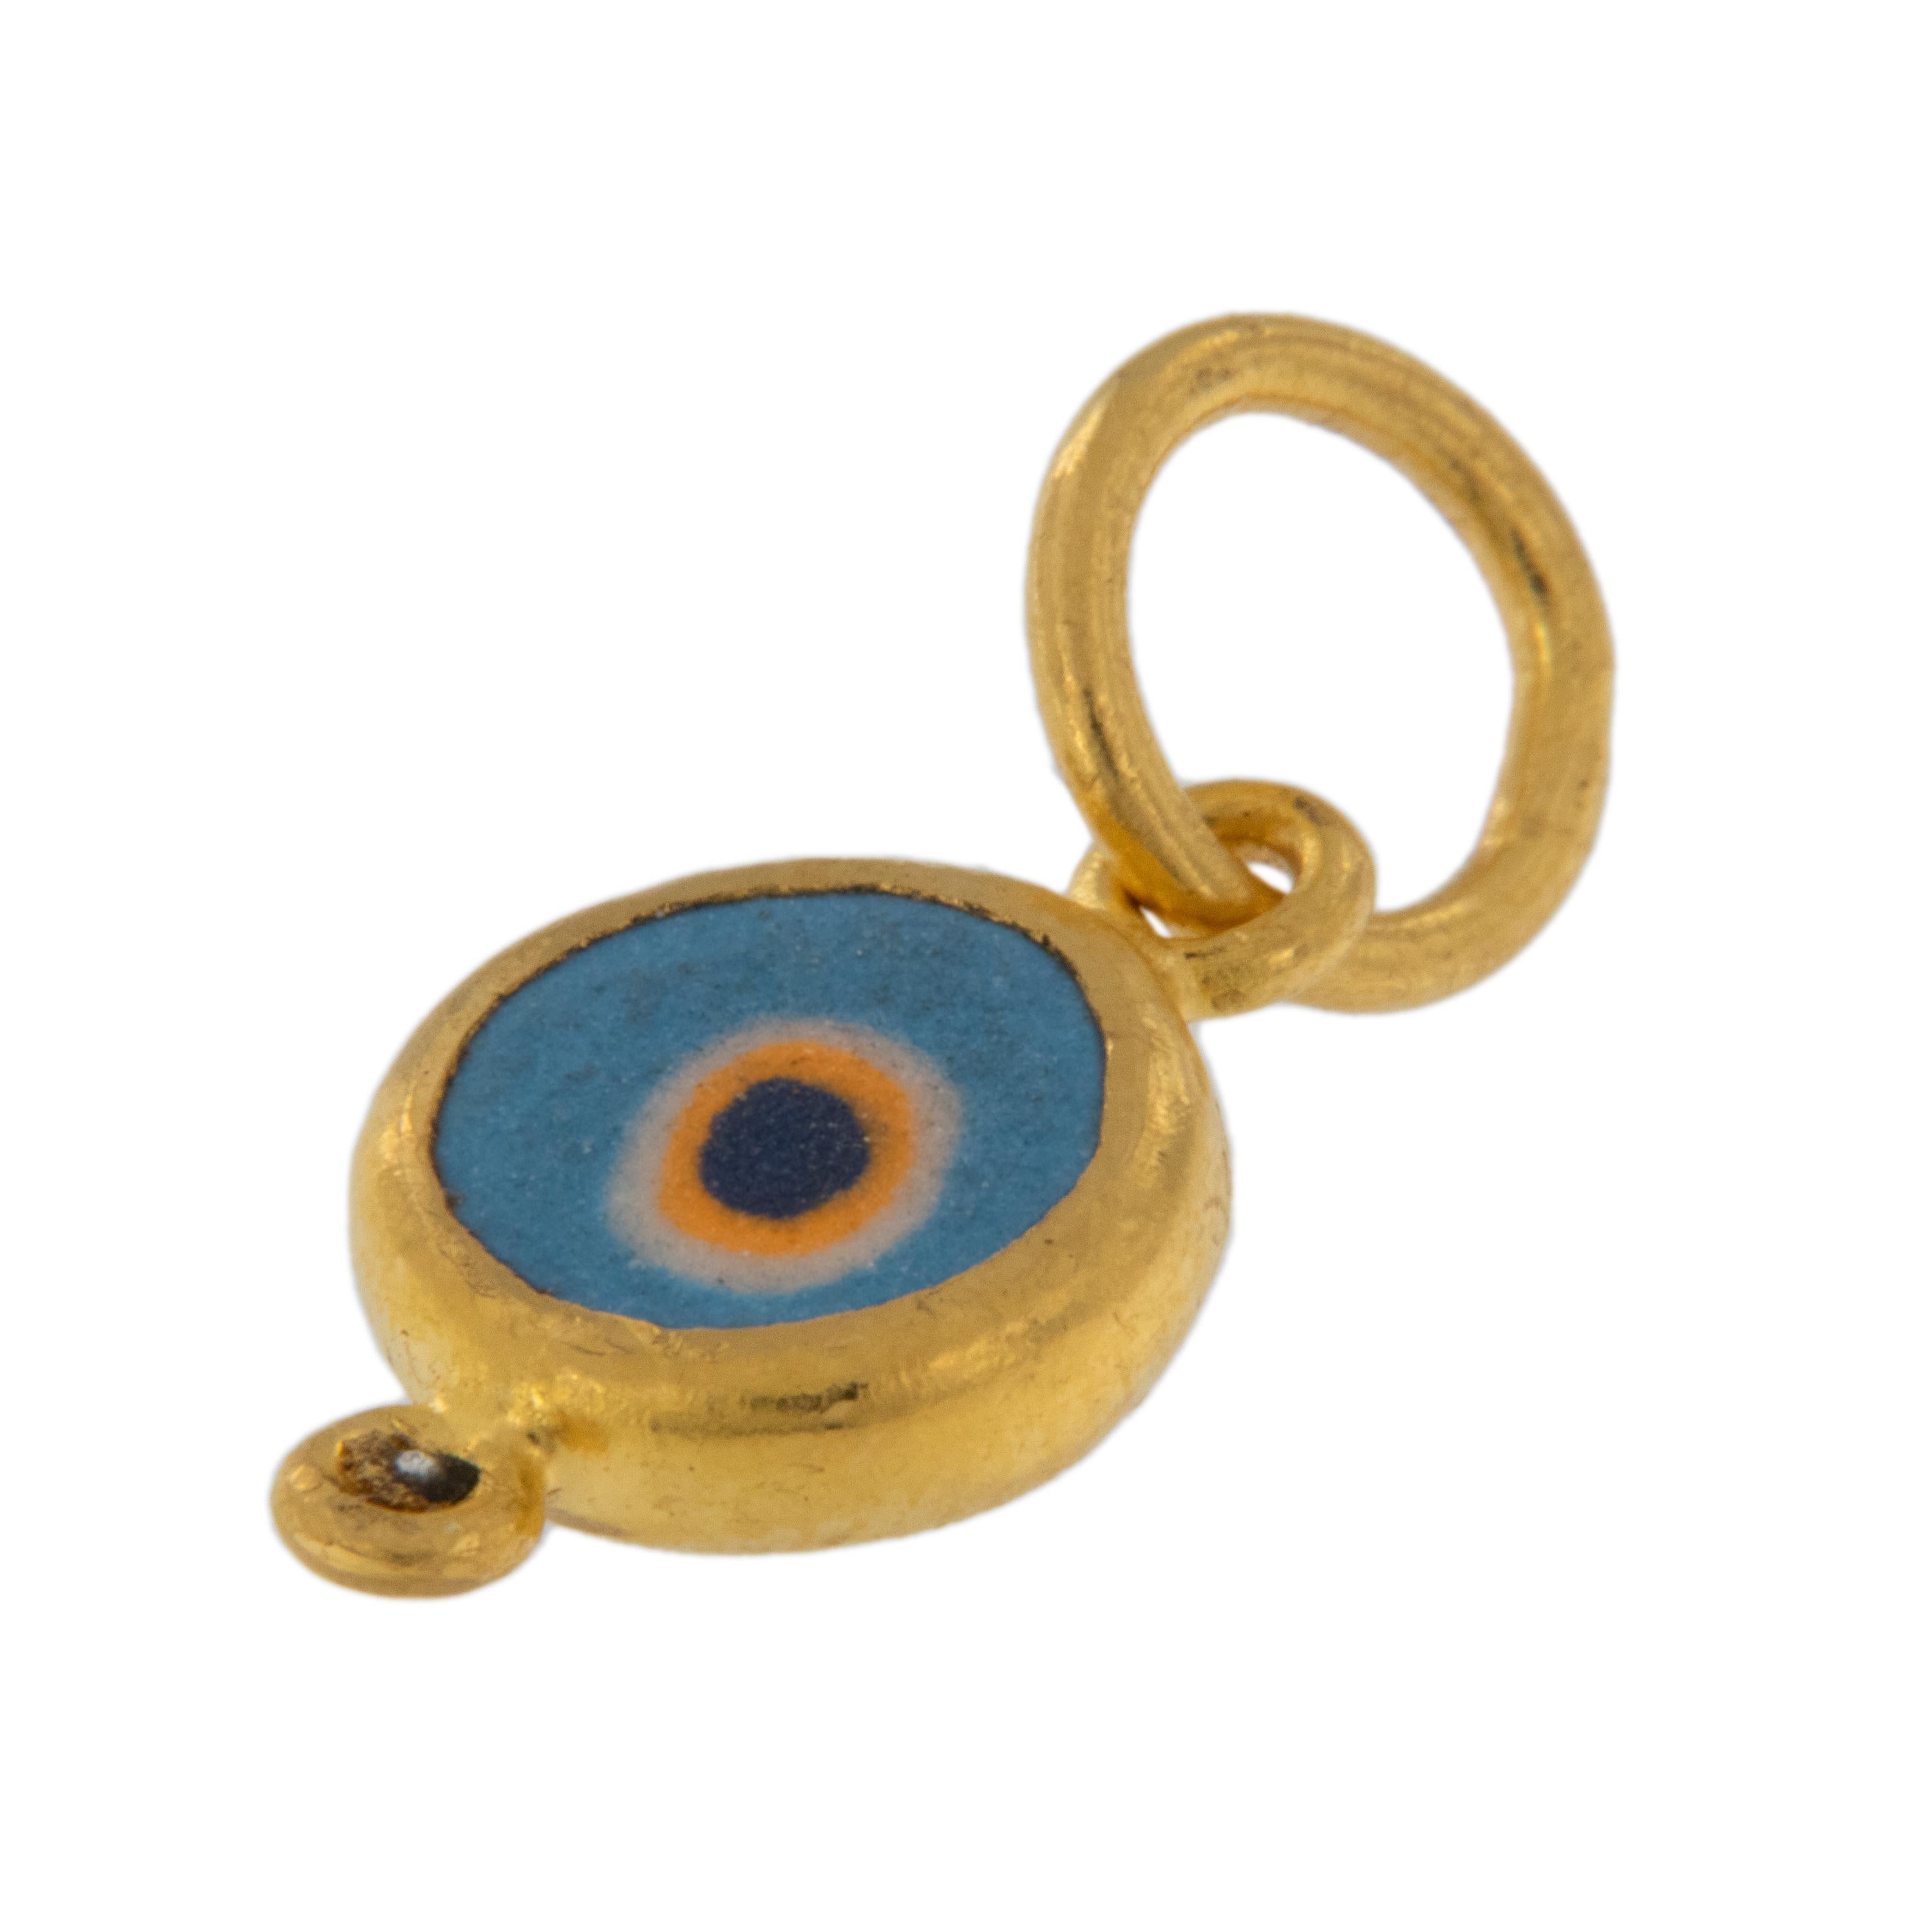 Rarest of all the golds, 24 karat gold is valued by all discerning investors. With it's unmistakable warm yellow color & hammered finish with diamond accent this evil eye pendant / charm talisman is thought to keep you safe from curses. Light Blue: